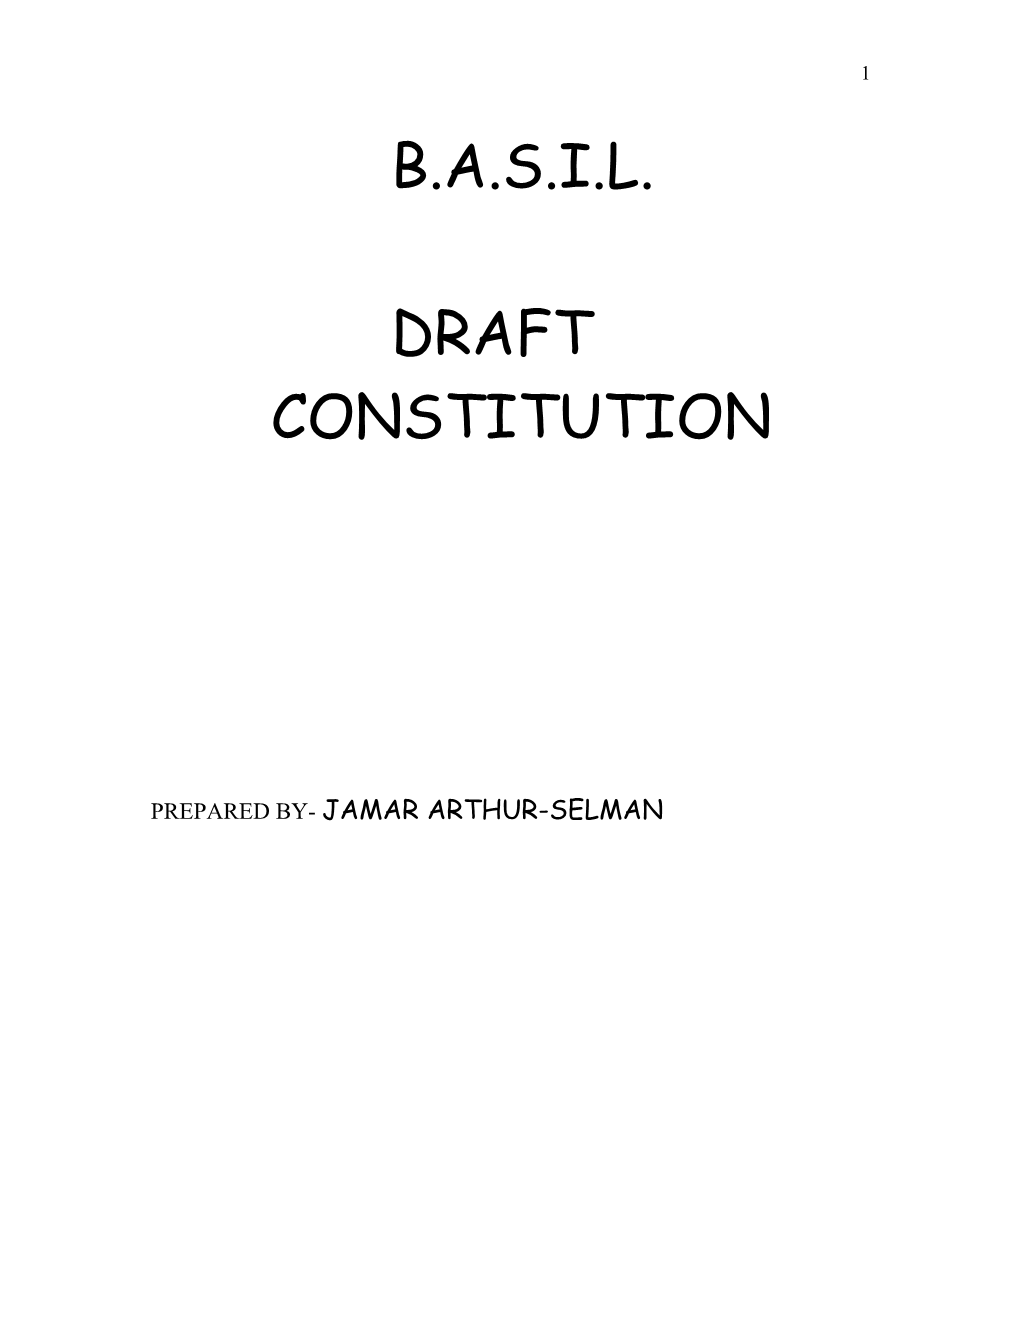 The Constitution of B